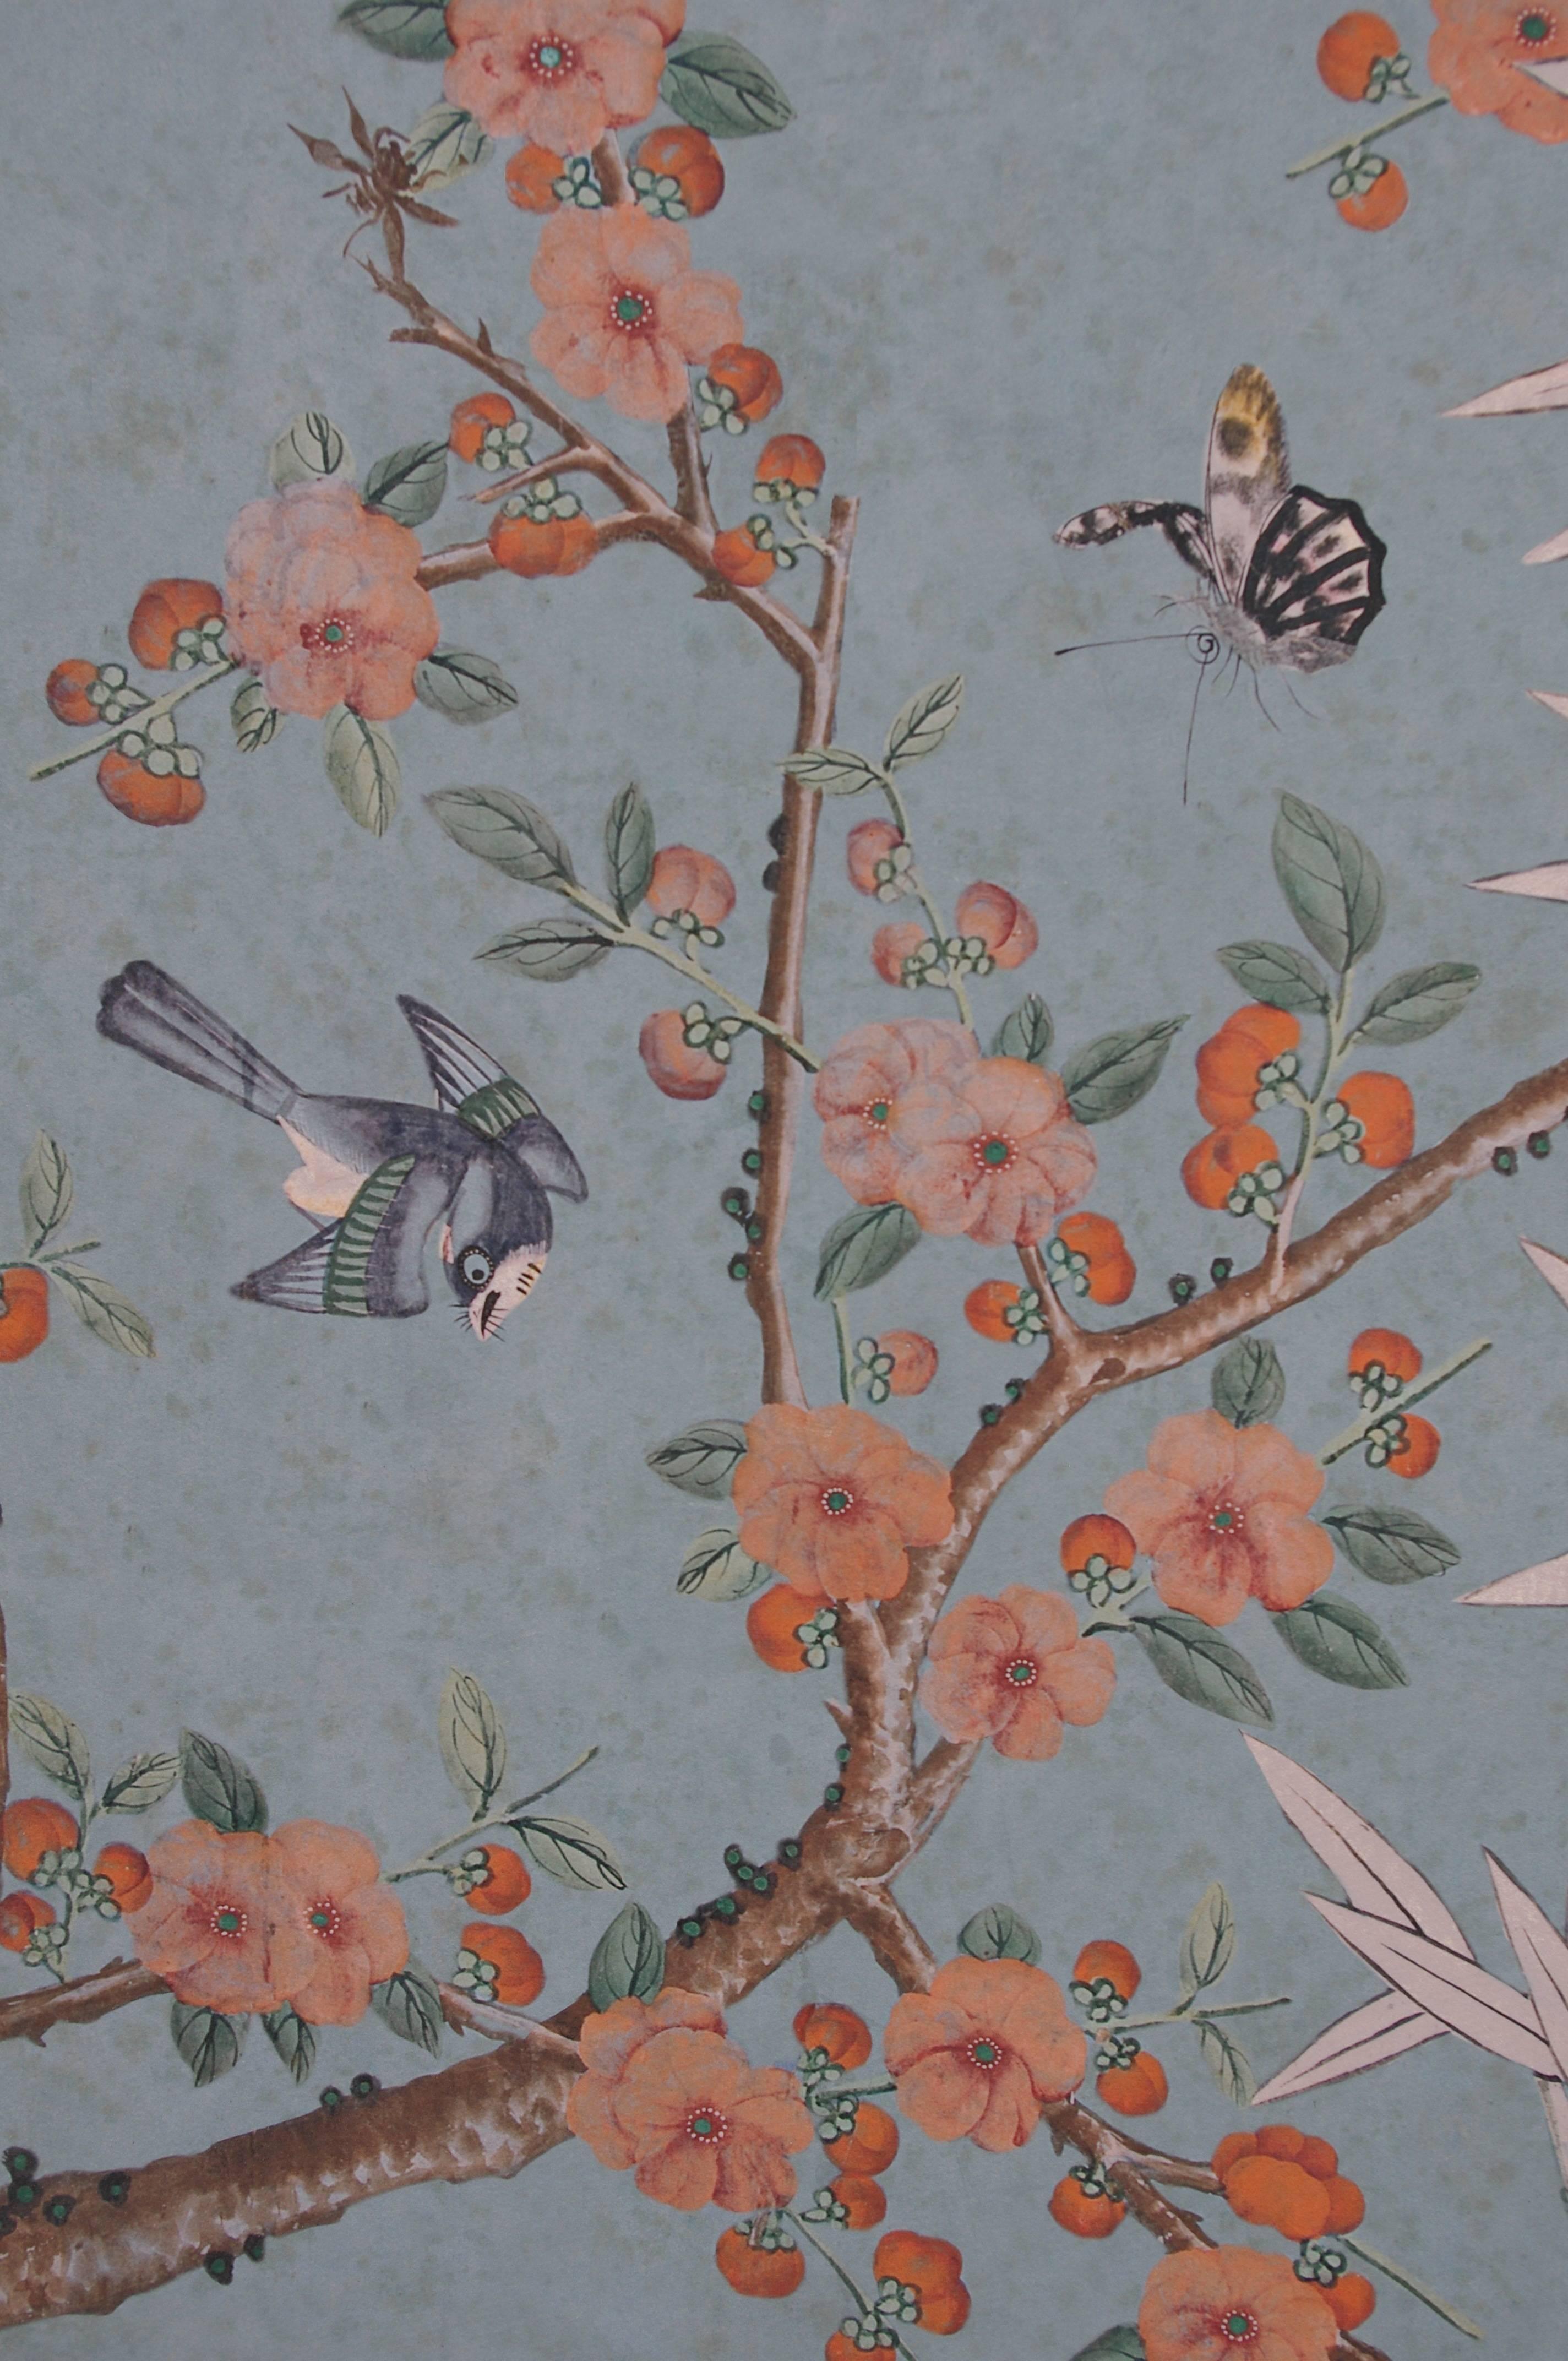 Made in China for the East India Company who sold it to the great houses of Europe. It was painted circa 1800 in the region of Canton. Found in chateau de Madame de Maintenon in France where it has been scanned in order to be reproduced.
Work from